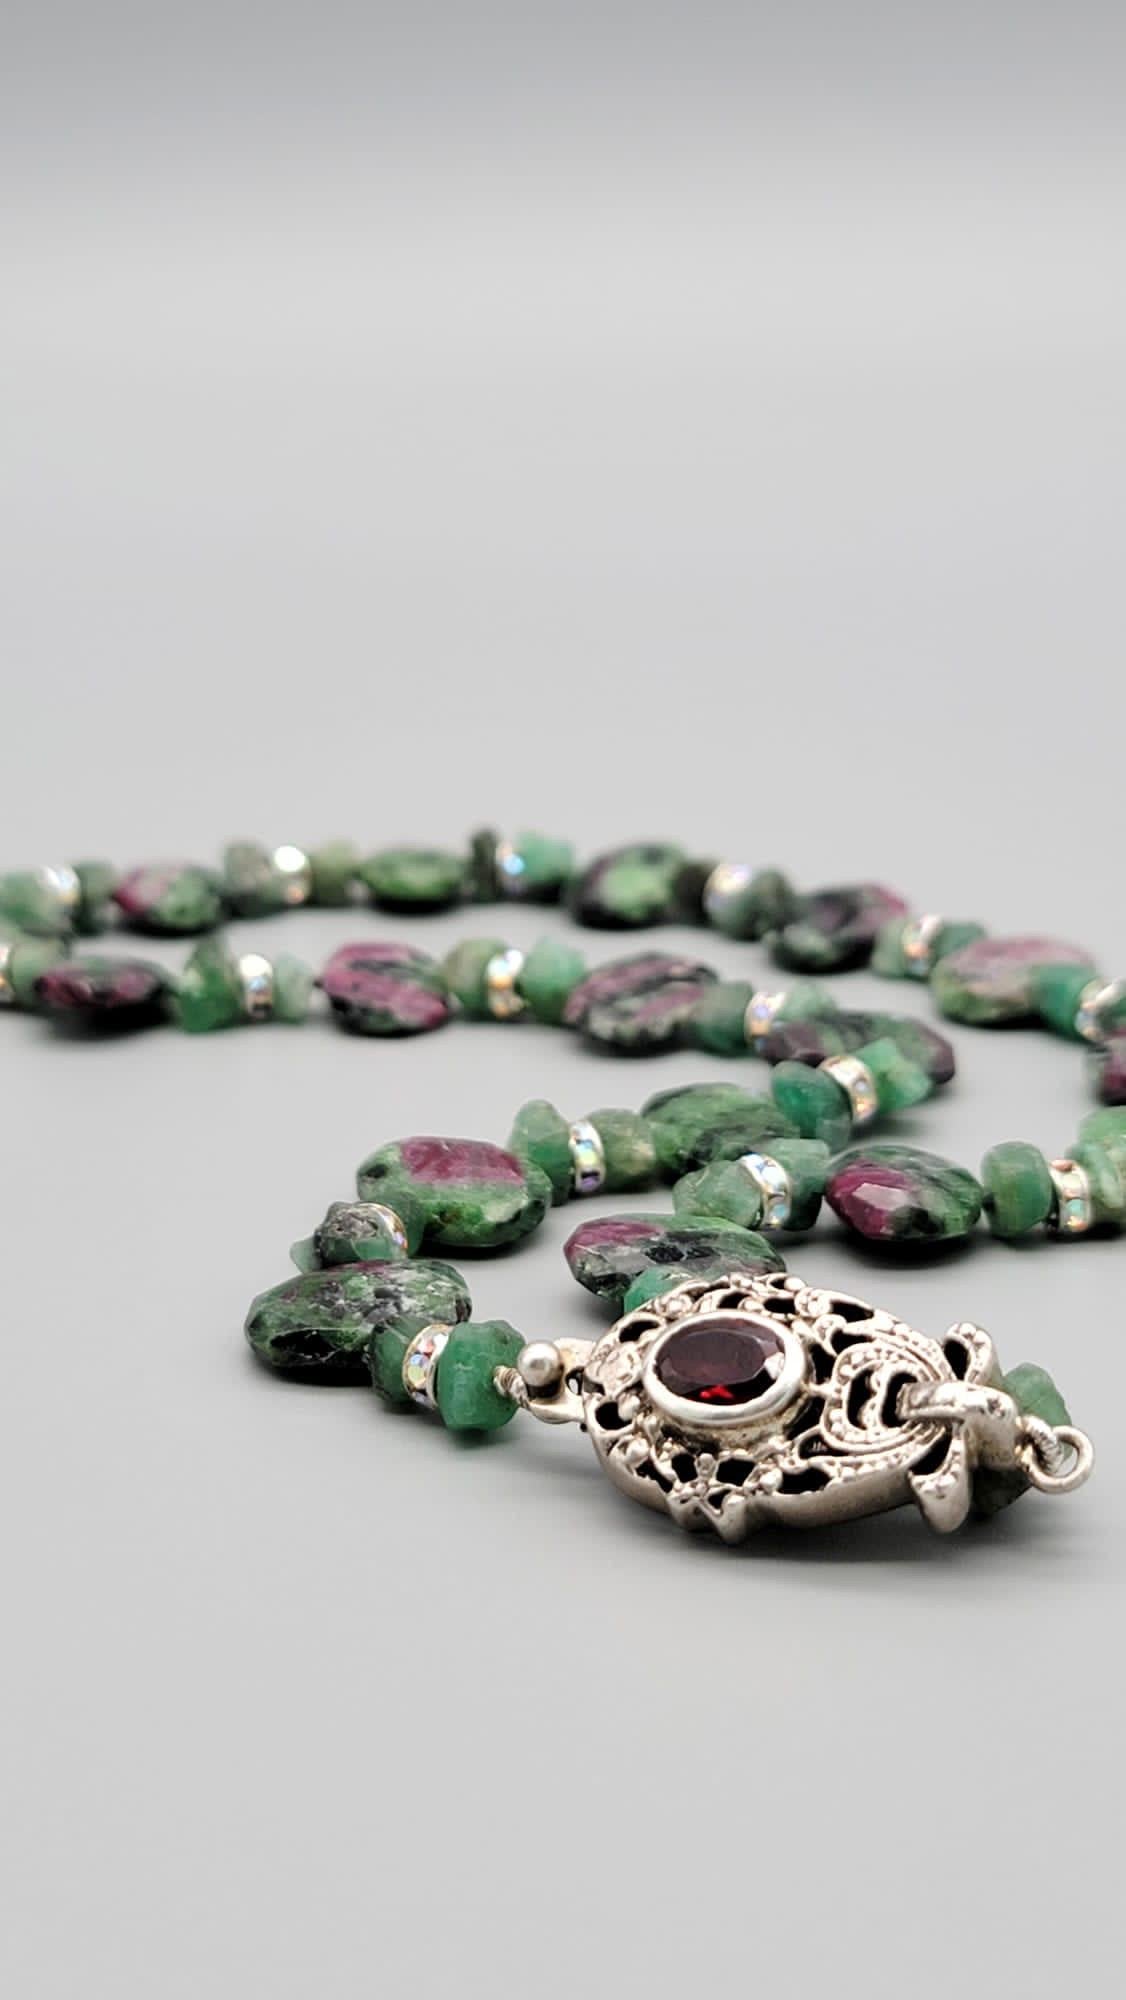 A.Jeschel Ruby in Zoisite and Emerald necklace. 4